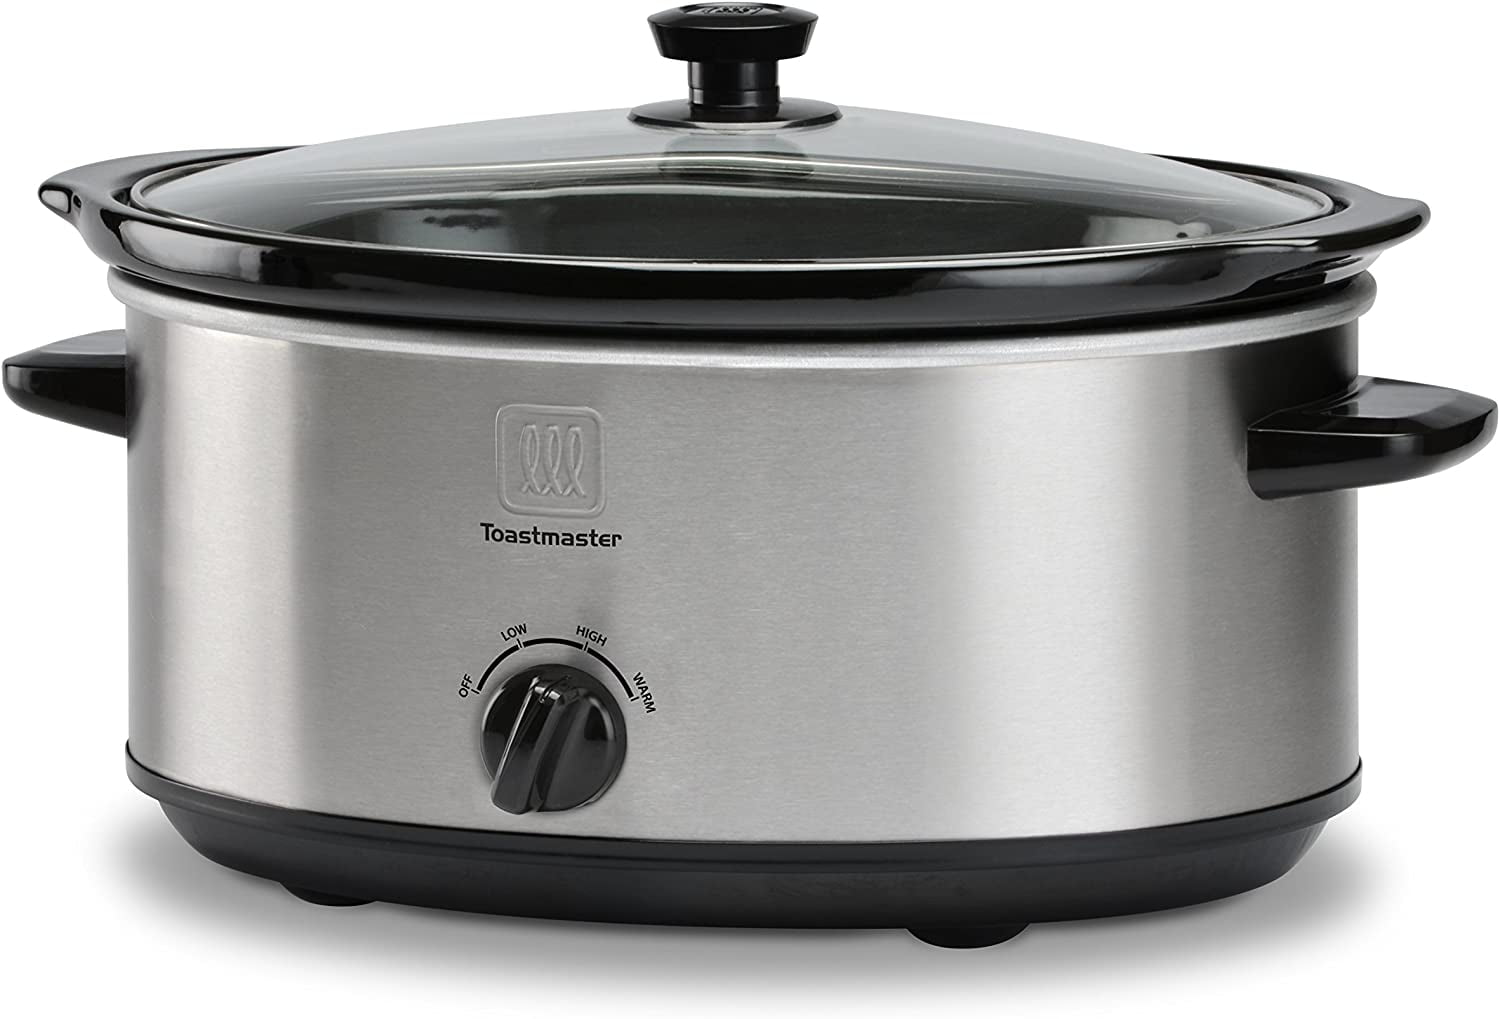 15 Great Extra Large Slow Cookers Available Online (over 7 quarts)